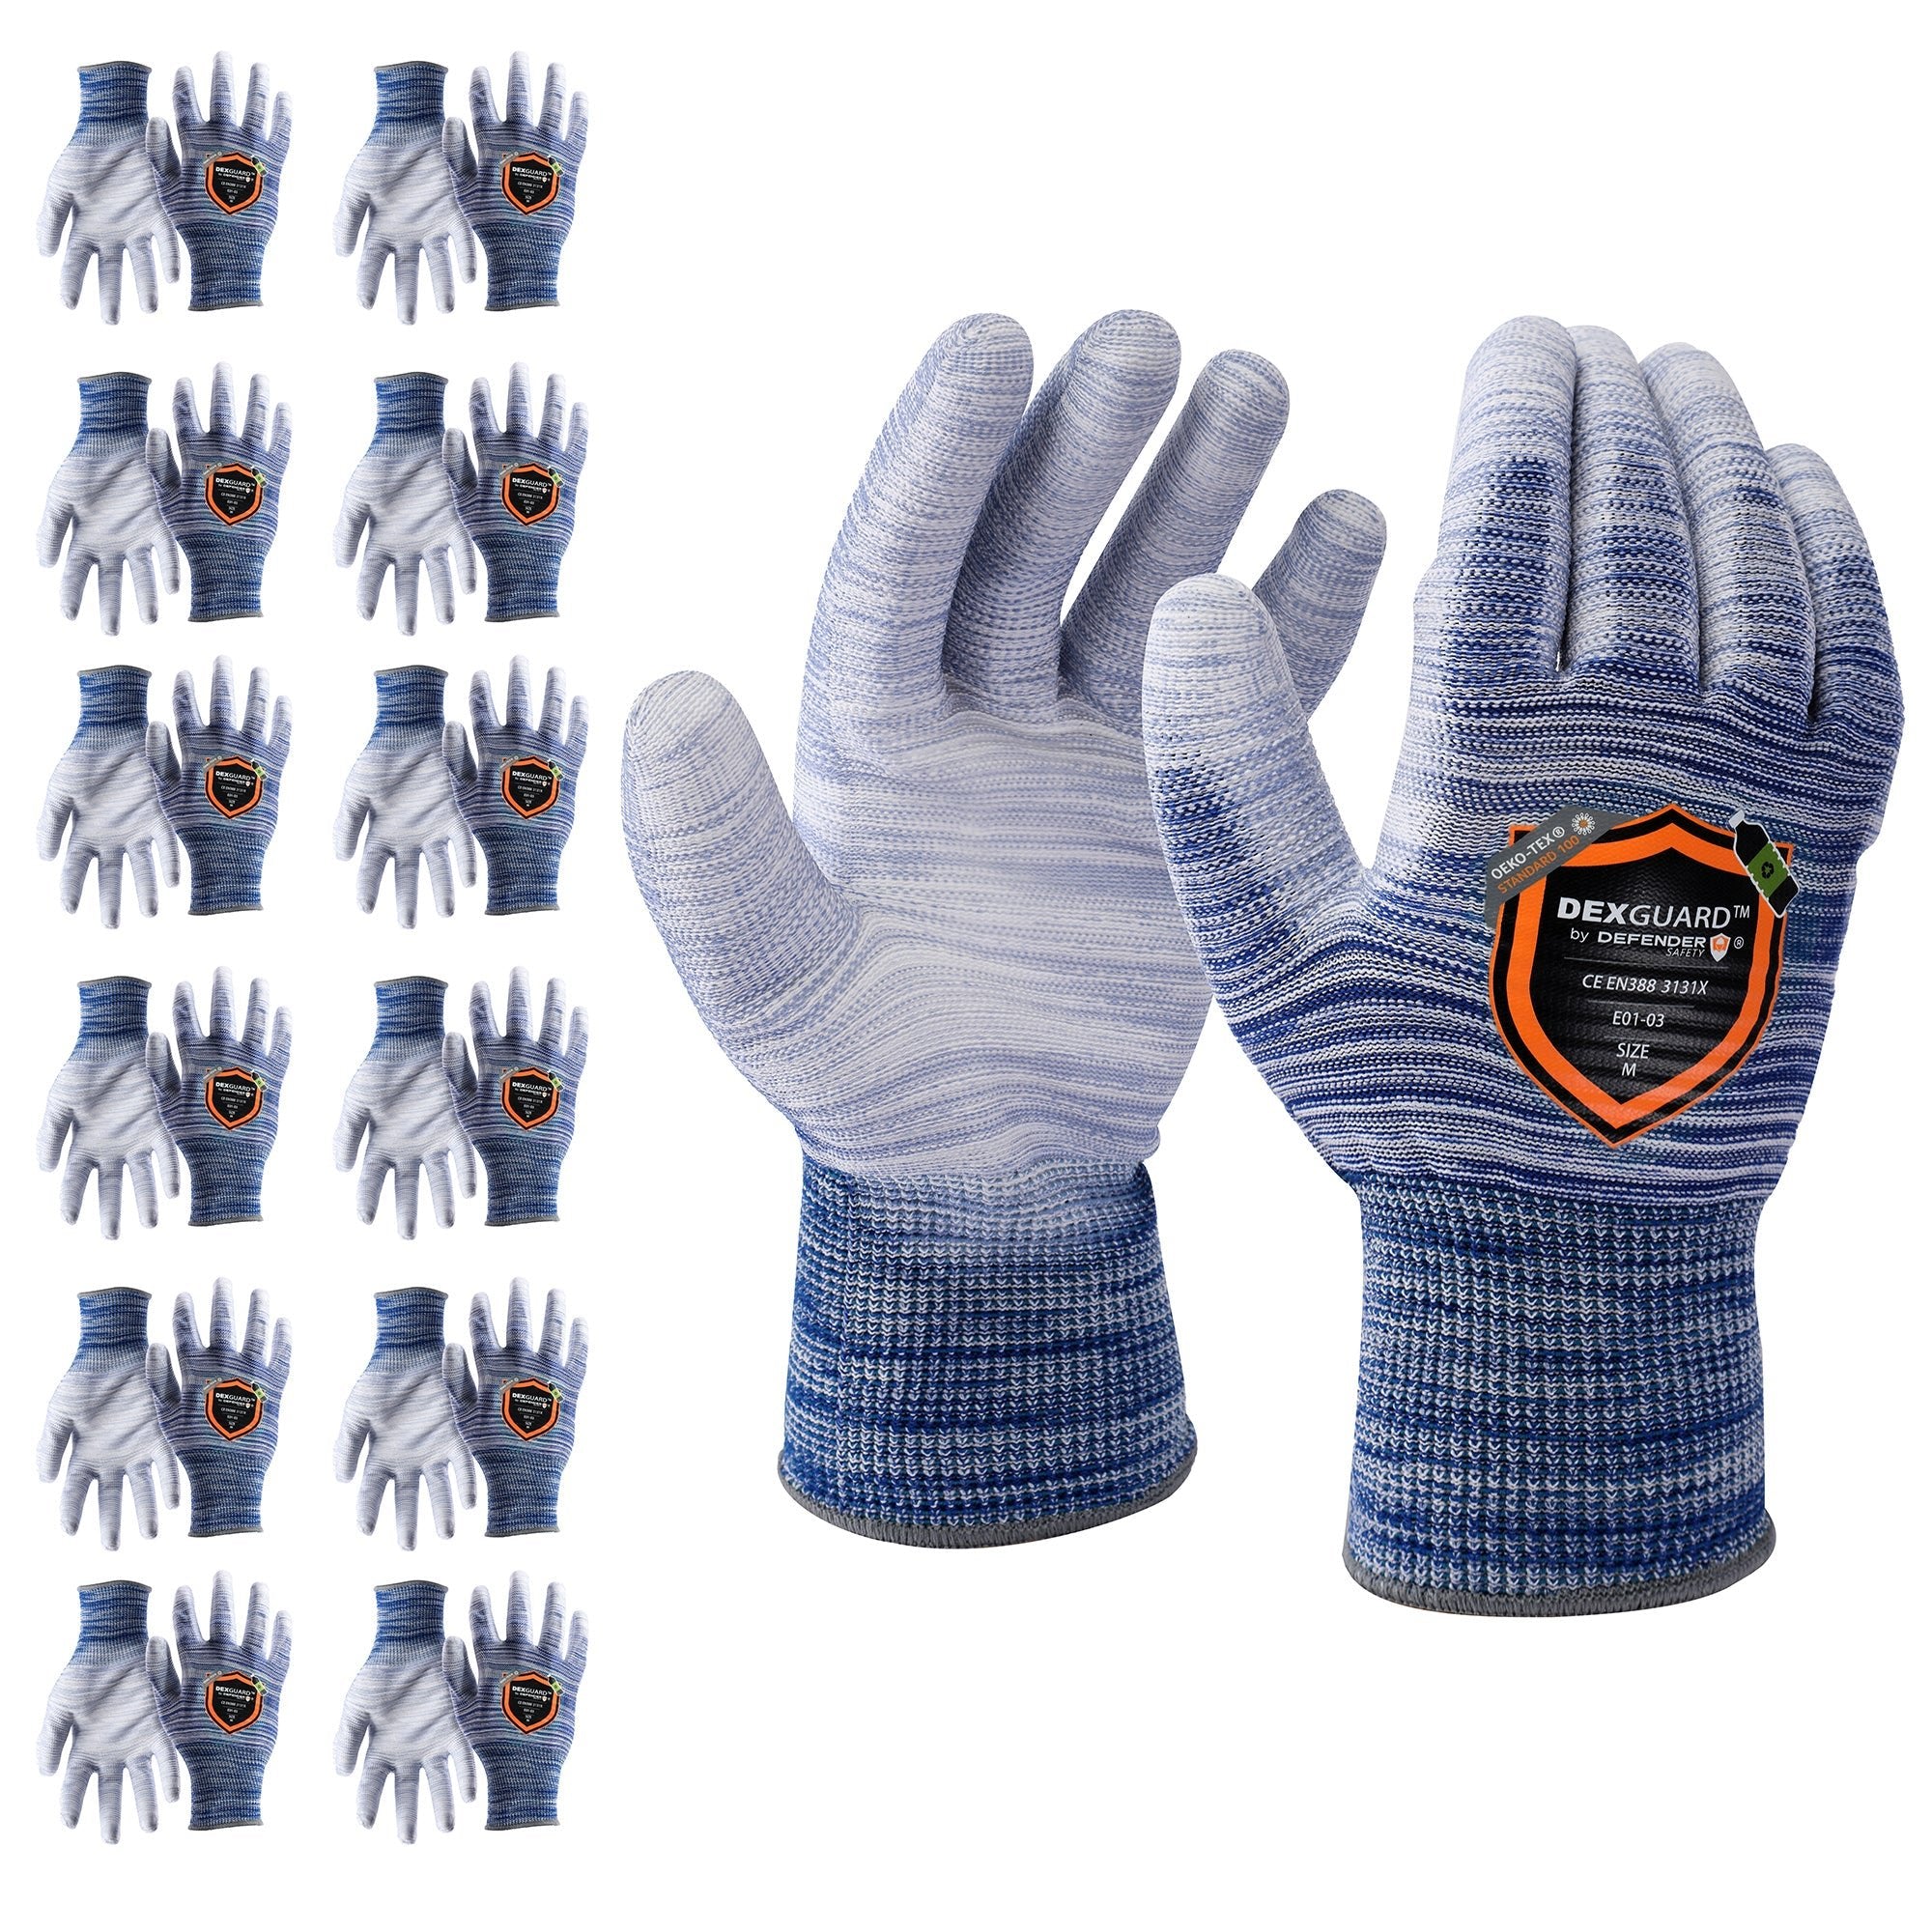 3 pairs Anti-cut Gloves Safety Cut level 3 work gloves landscapers